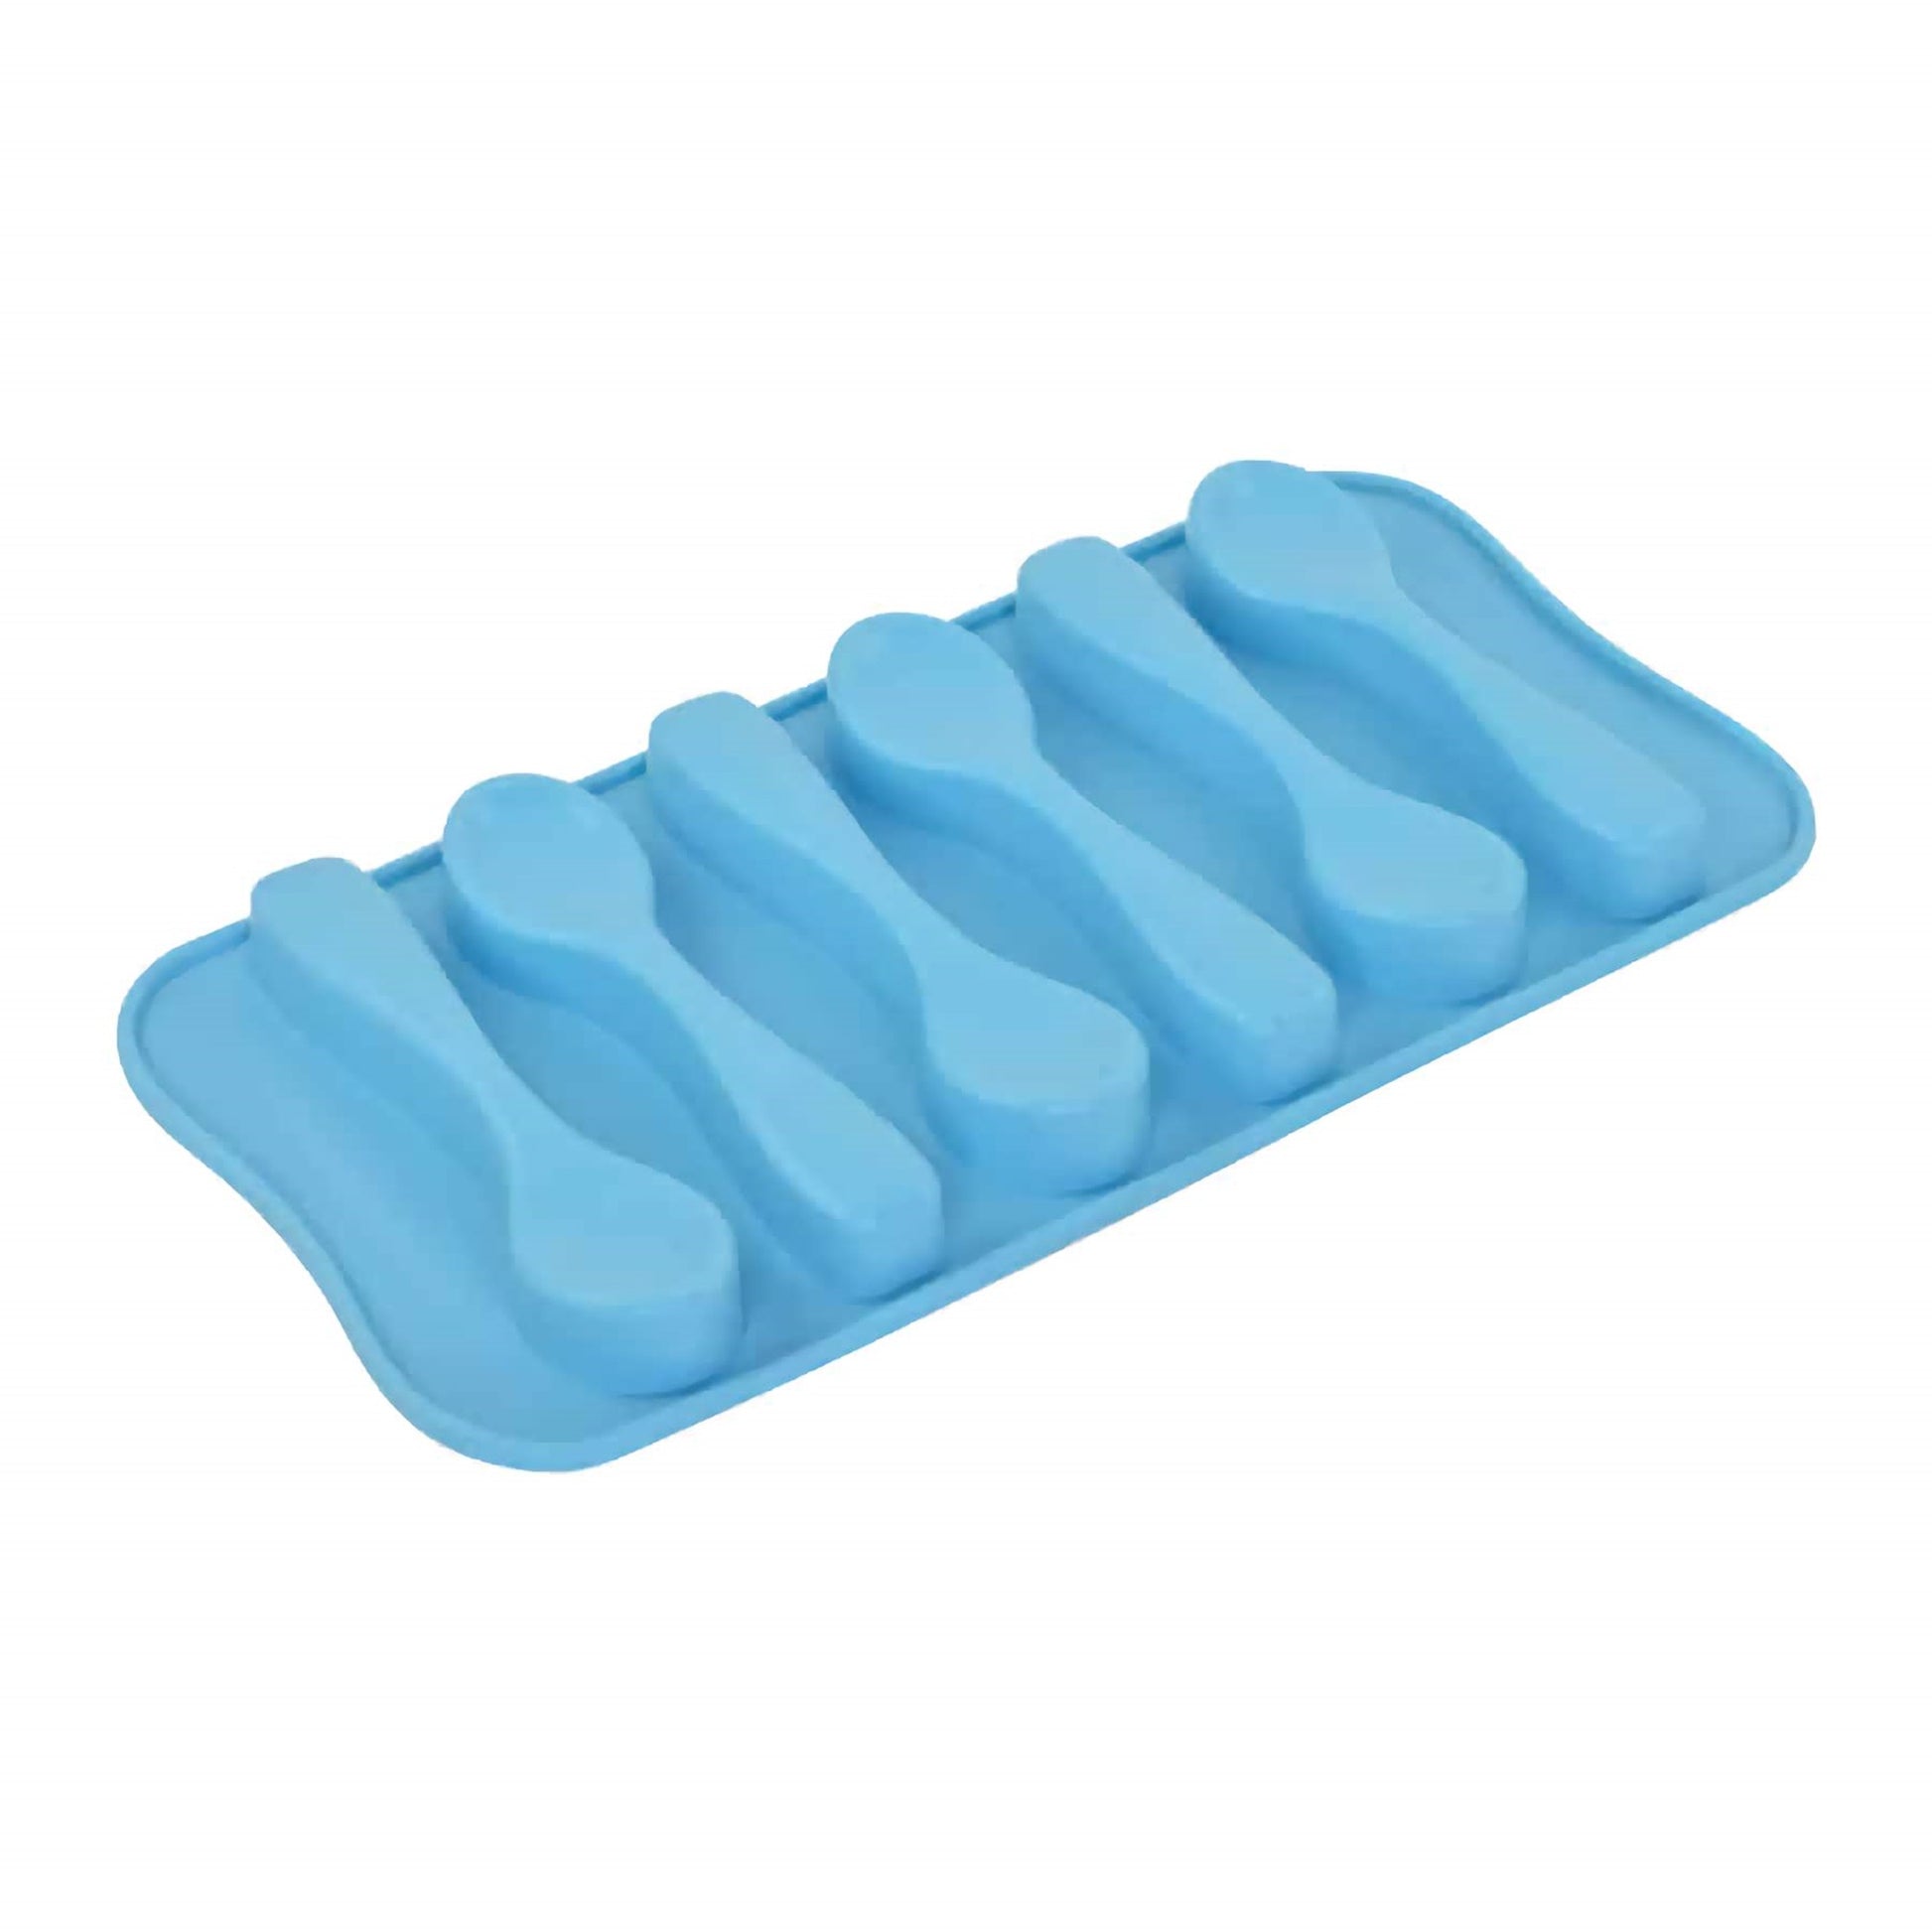 An inverted view of a blue silicone chocolate spoon mold, highlighting the mold's flexibility and non-stick surface. The upside-down cavities show the depth and the contour of the spoon shapes, with rounded bowls and elongated handles, implying the ease with which the chocolate spoons can be demolded after setting.